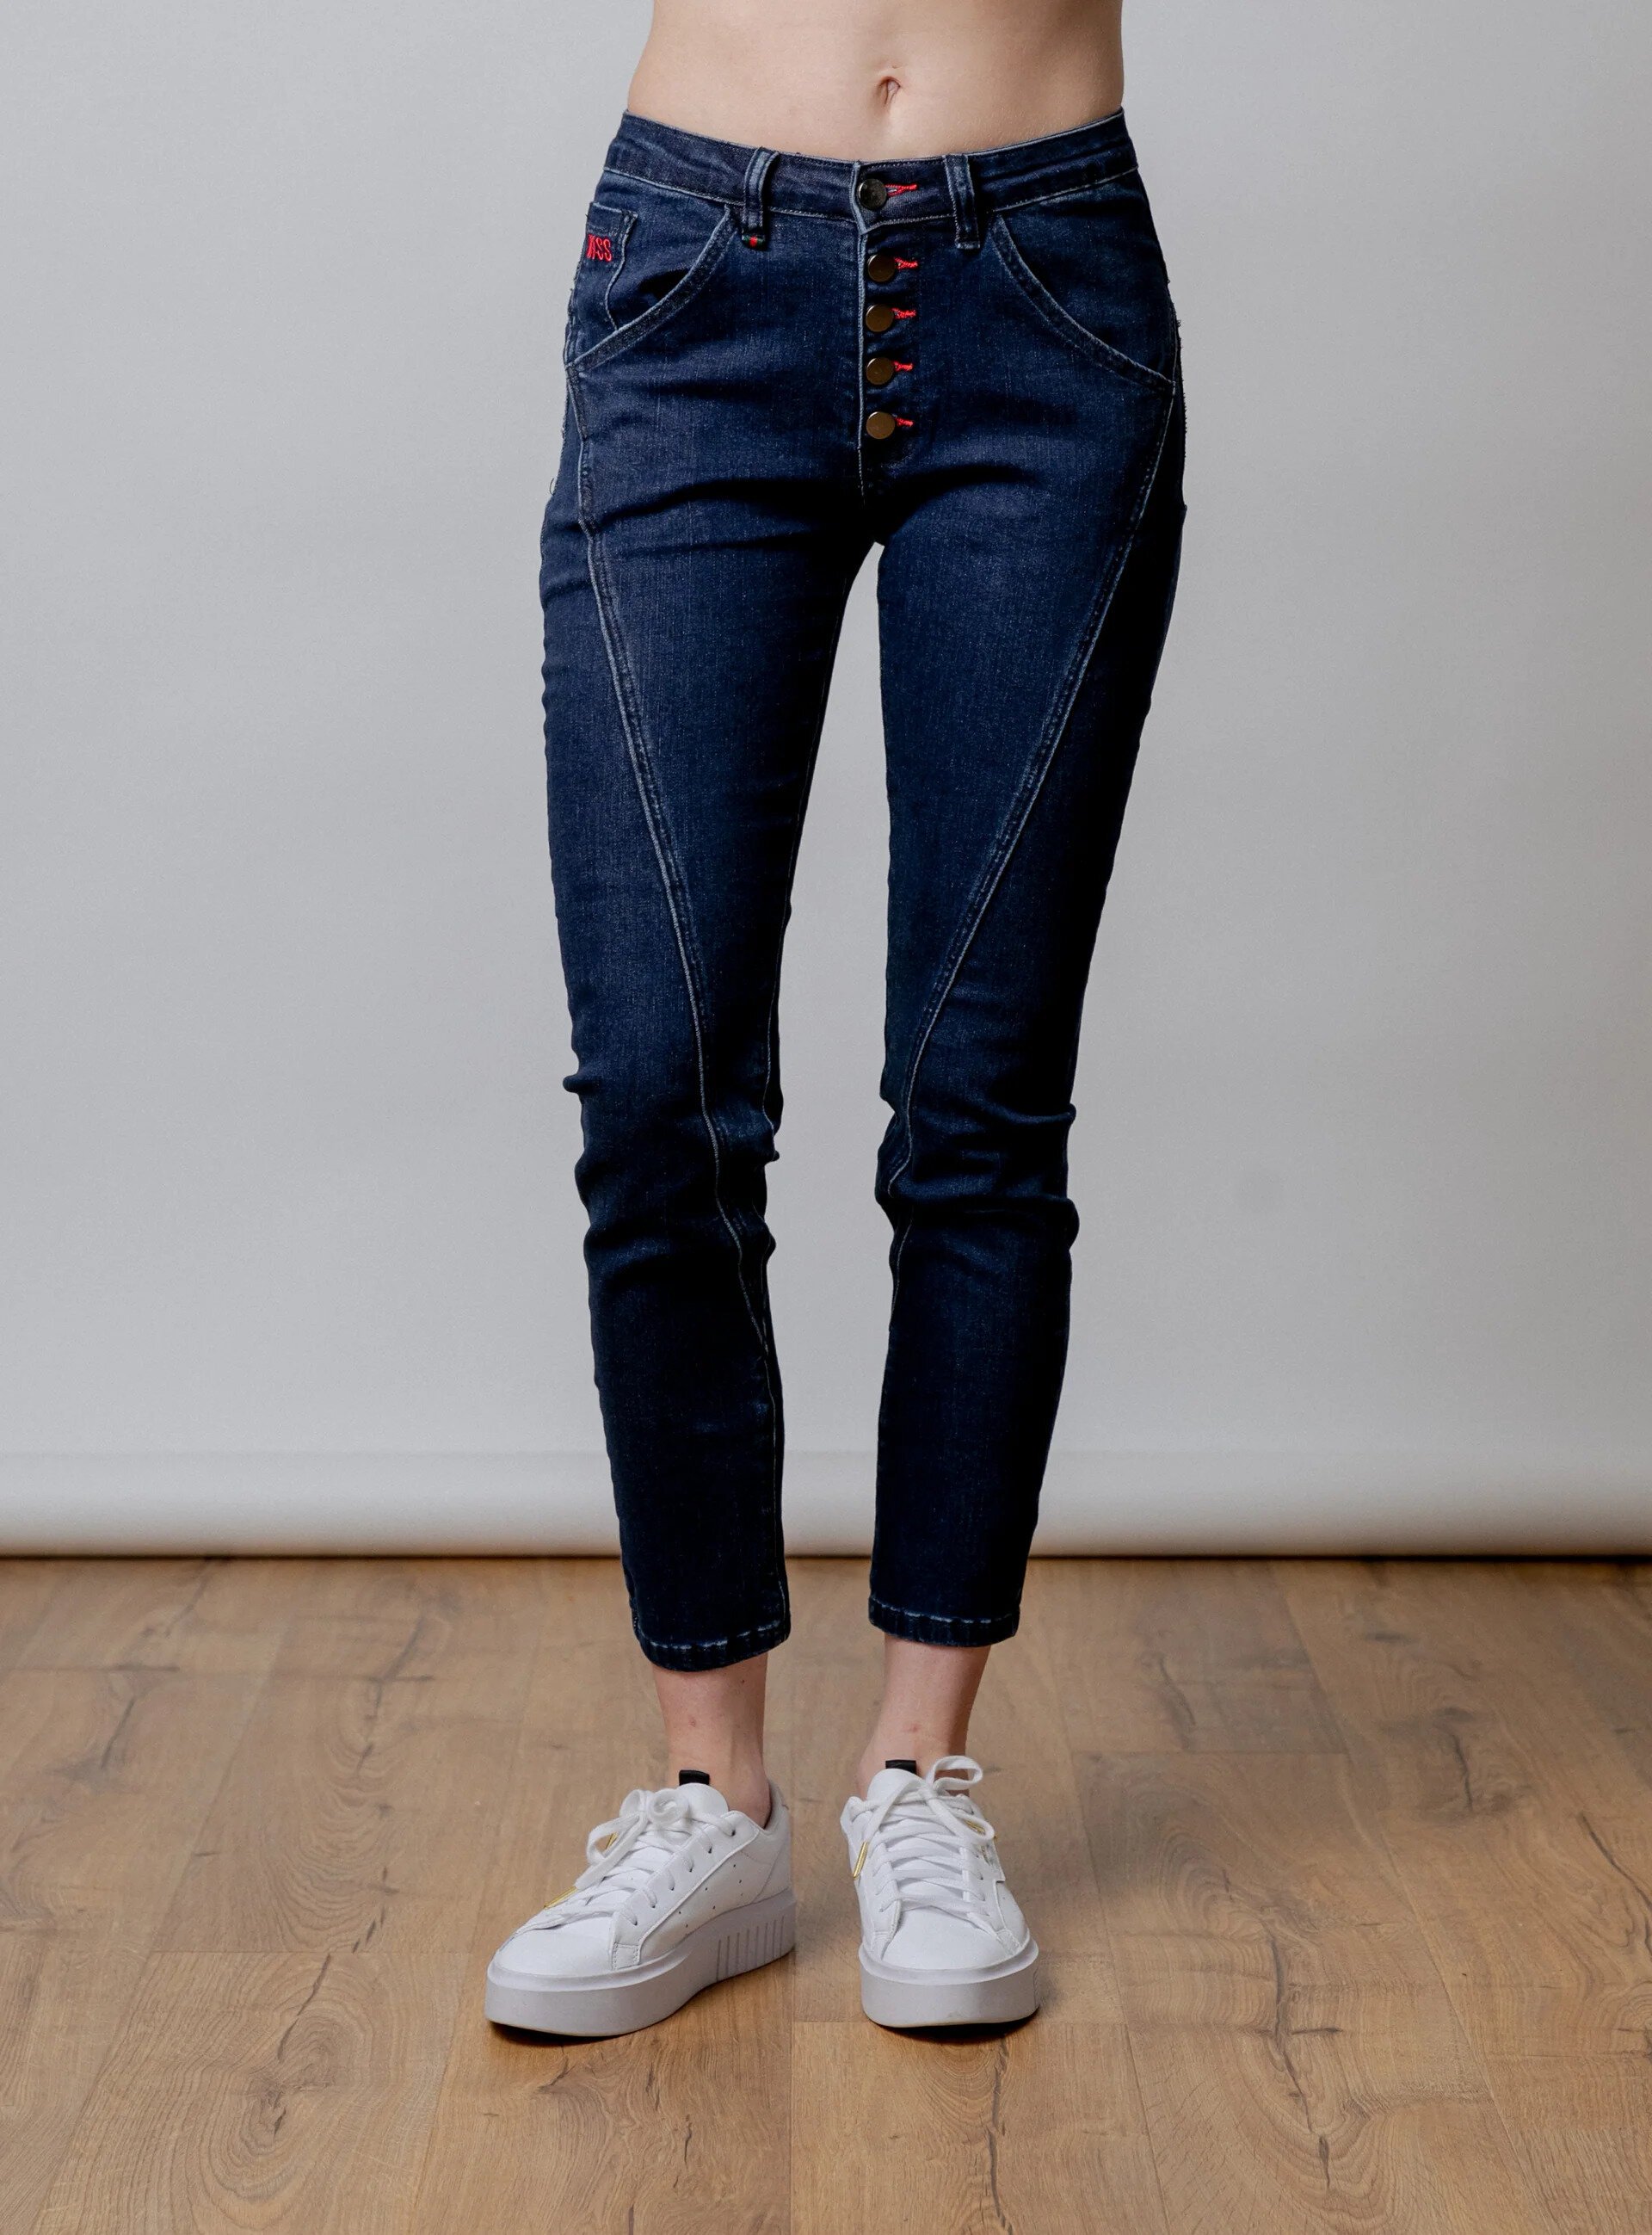 MOSS PETRA JEAN - Jeans : Mainly Casual | Women's Clothing | Stocking ...